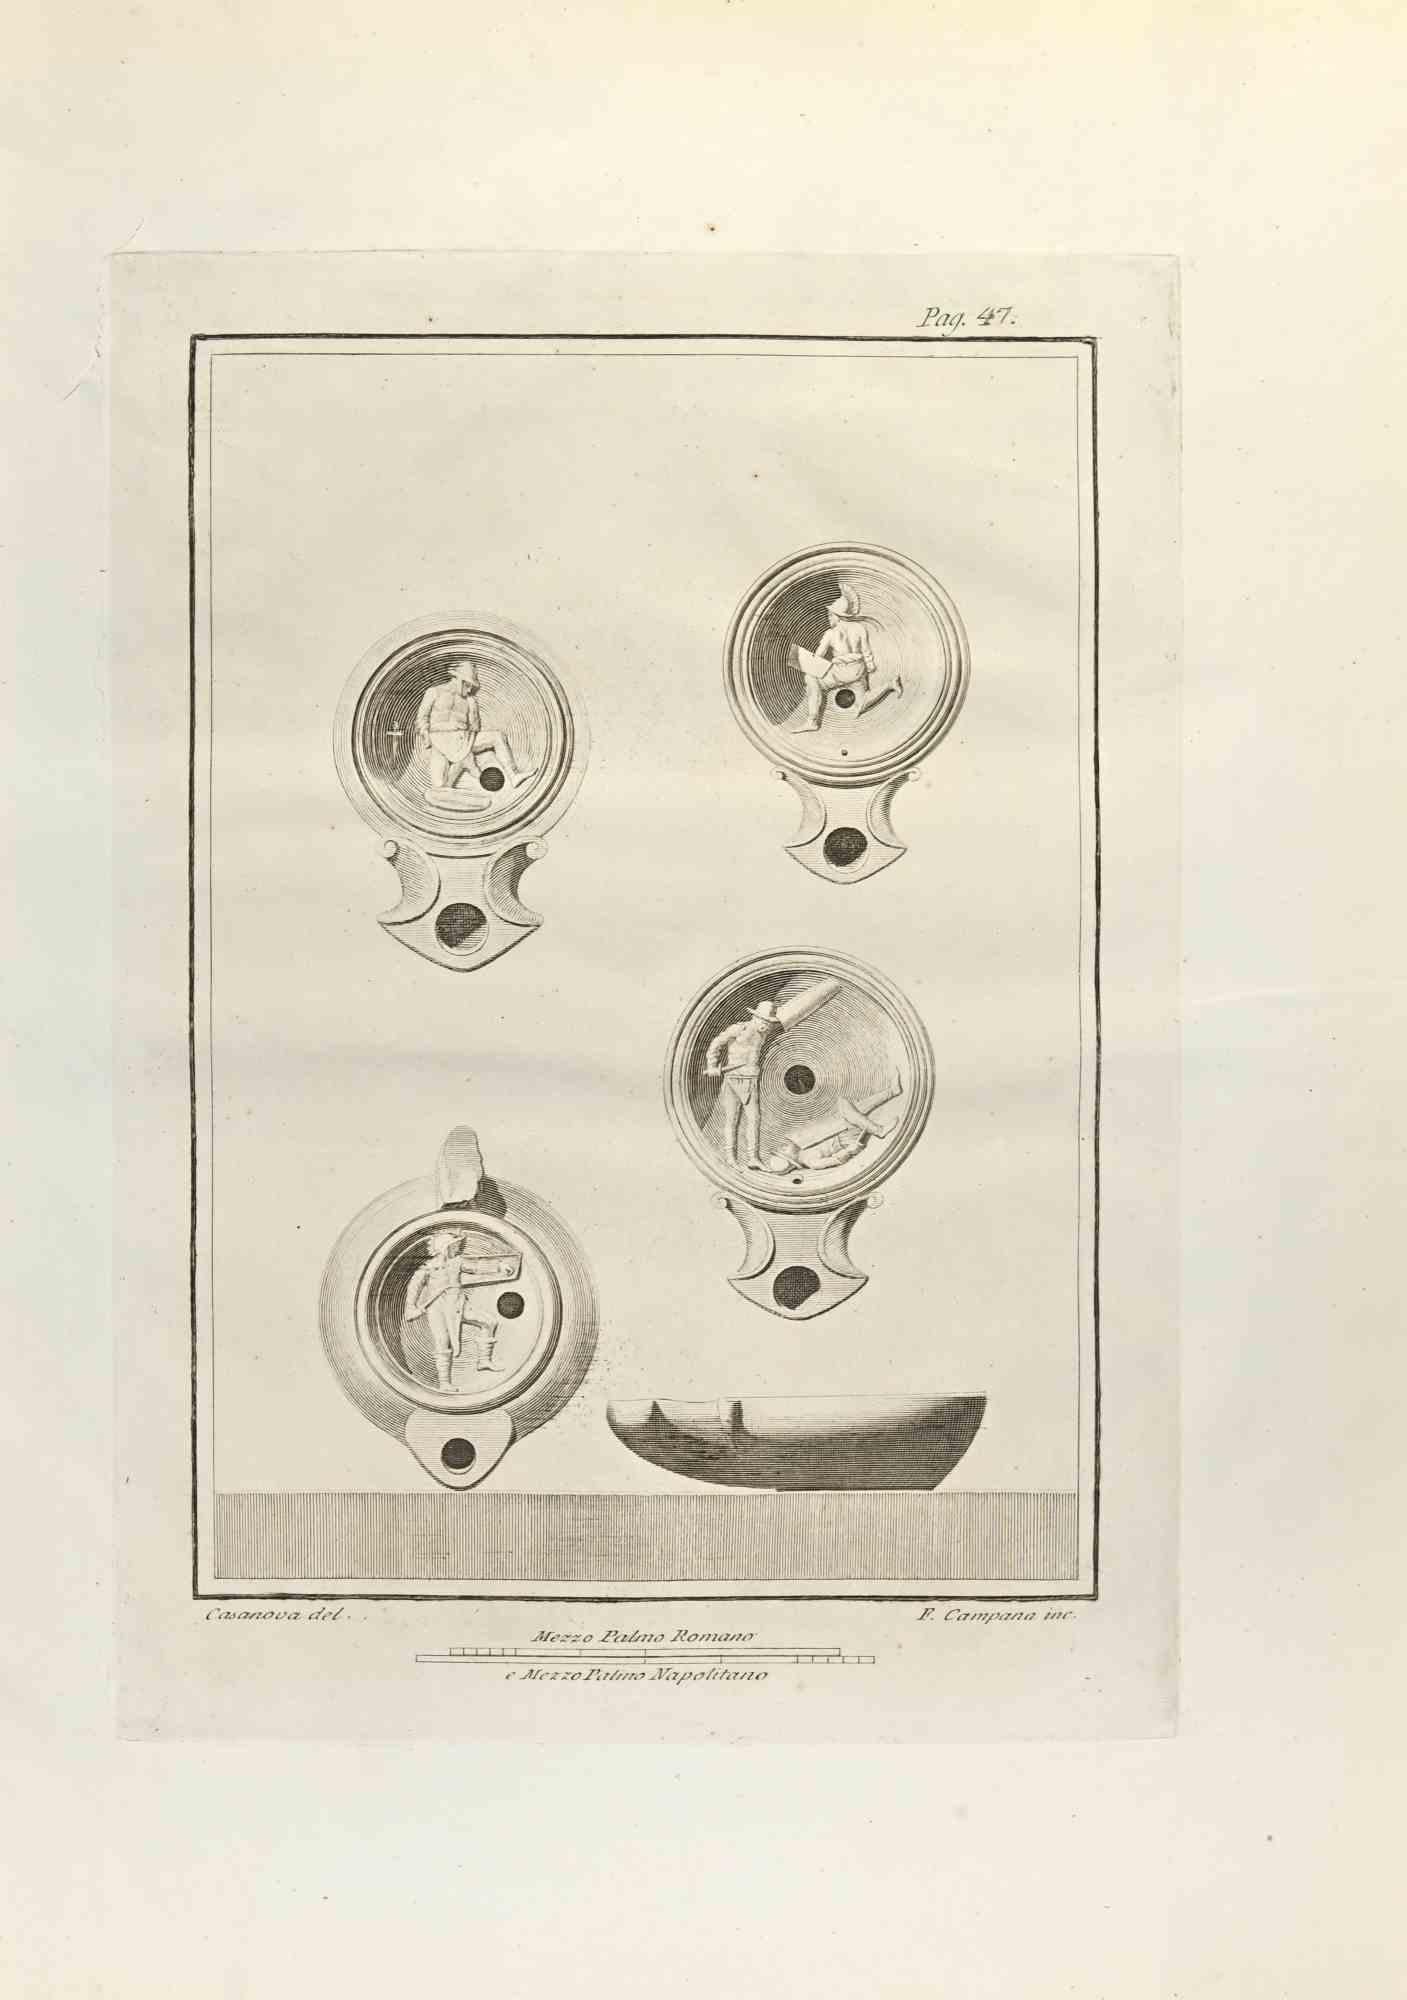 Oil Lamps With Fighting Soldiers from "Antiquities of Herculaneum" is an etching on paper realized by Ferdinando Campana in the 18th Century.

Signed on the plate.

Good conditions.

The etching belongs to the print suite “Antiquities of Herculaneum